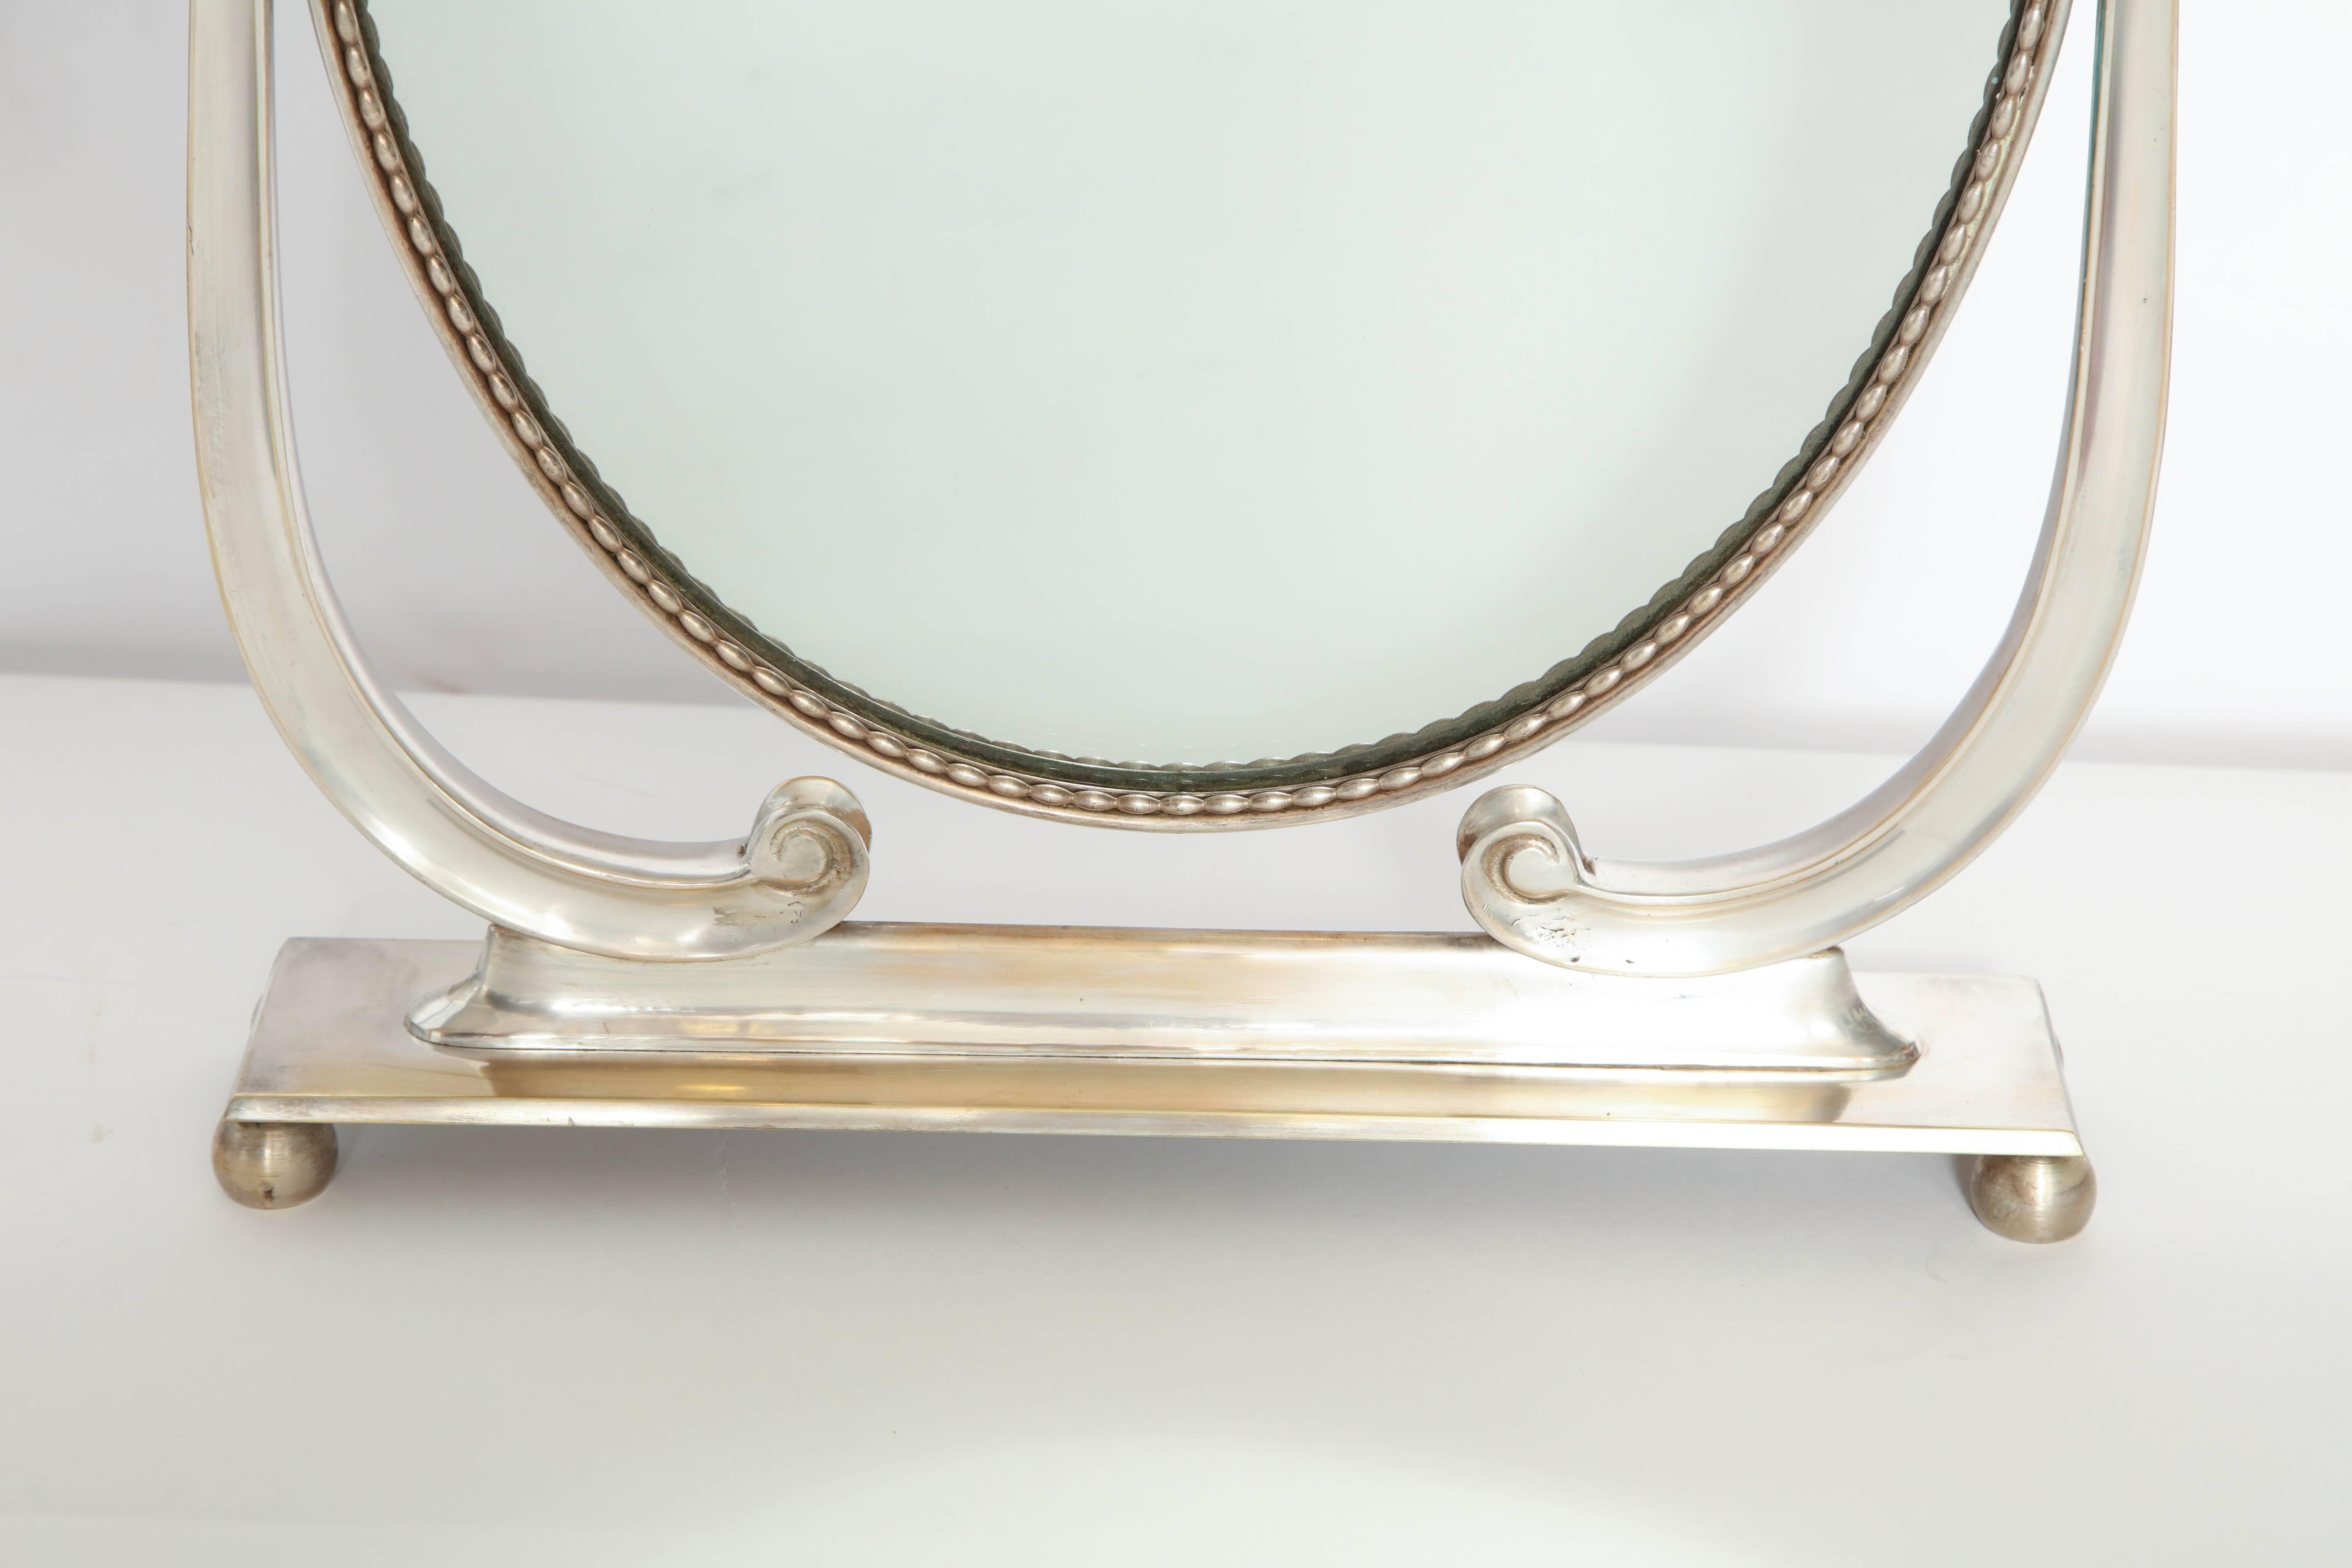 Plated Vanity Mirror Art Deco Italy 1930s Silver Plate Adjustable